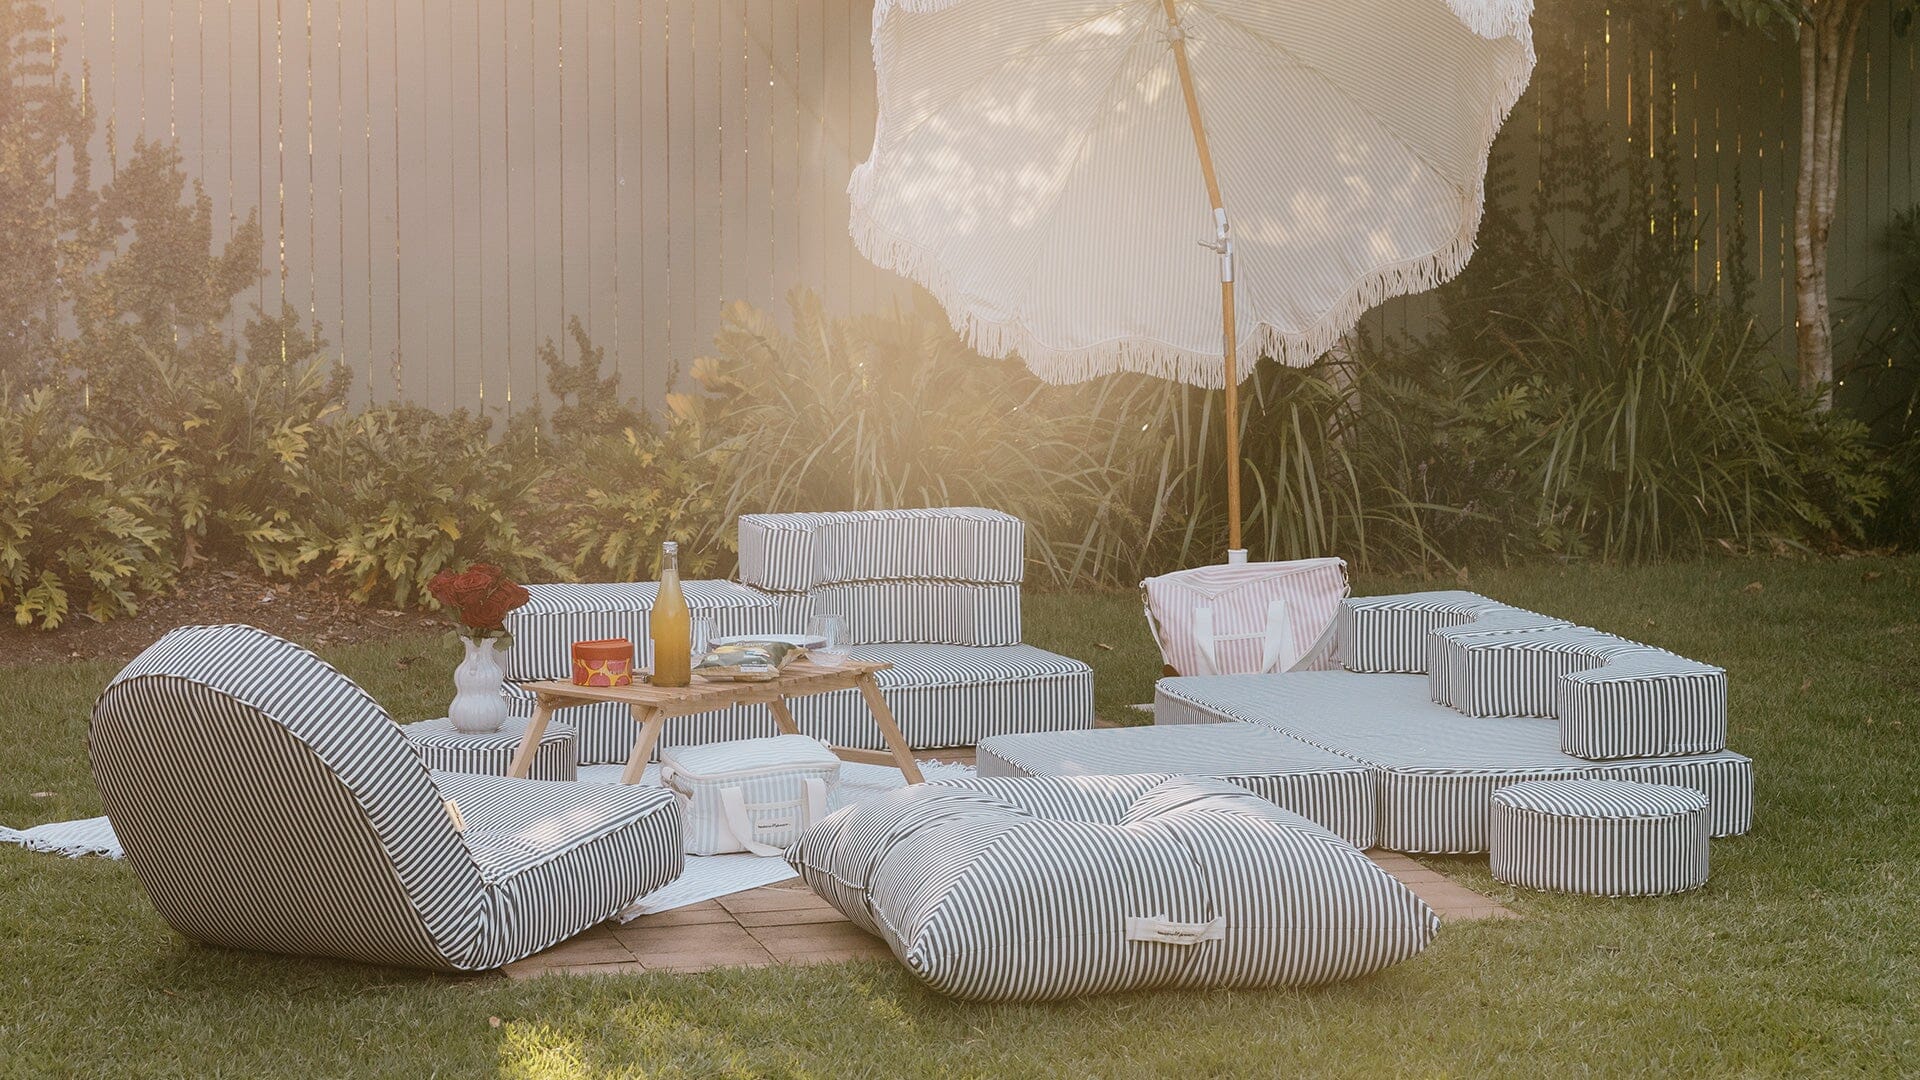 A pillow and recliner layout on the lawn under an umbrella